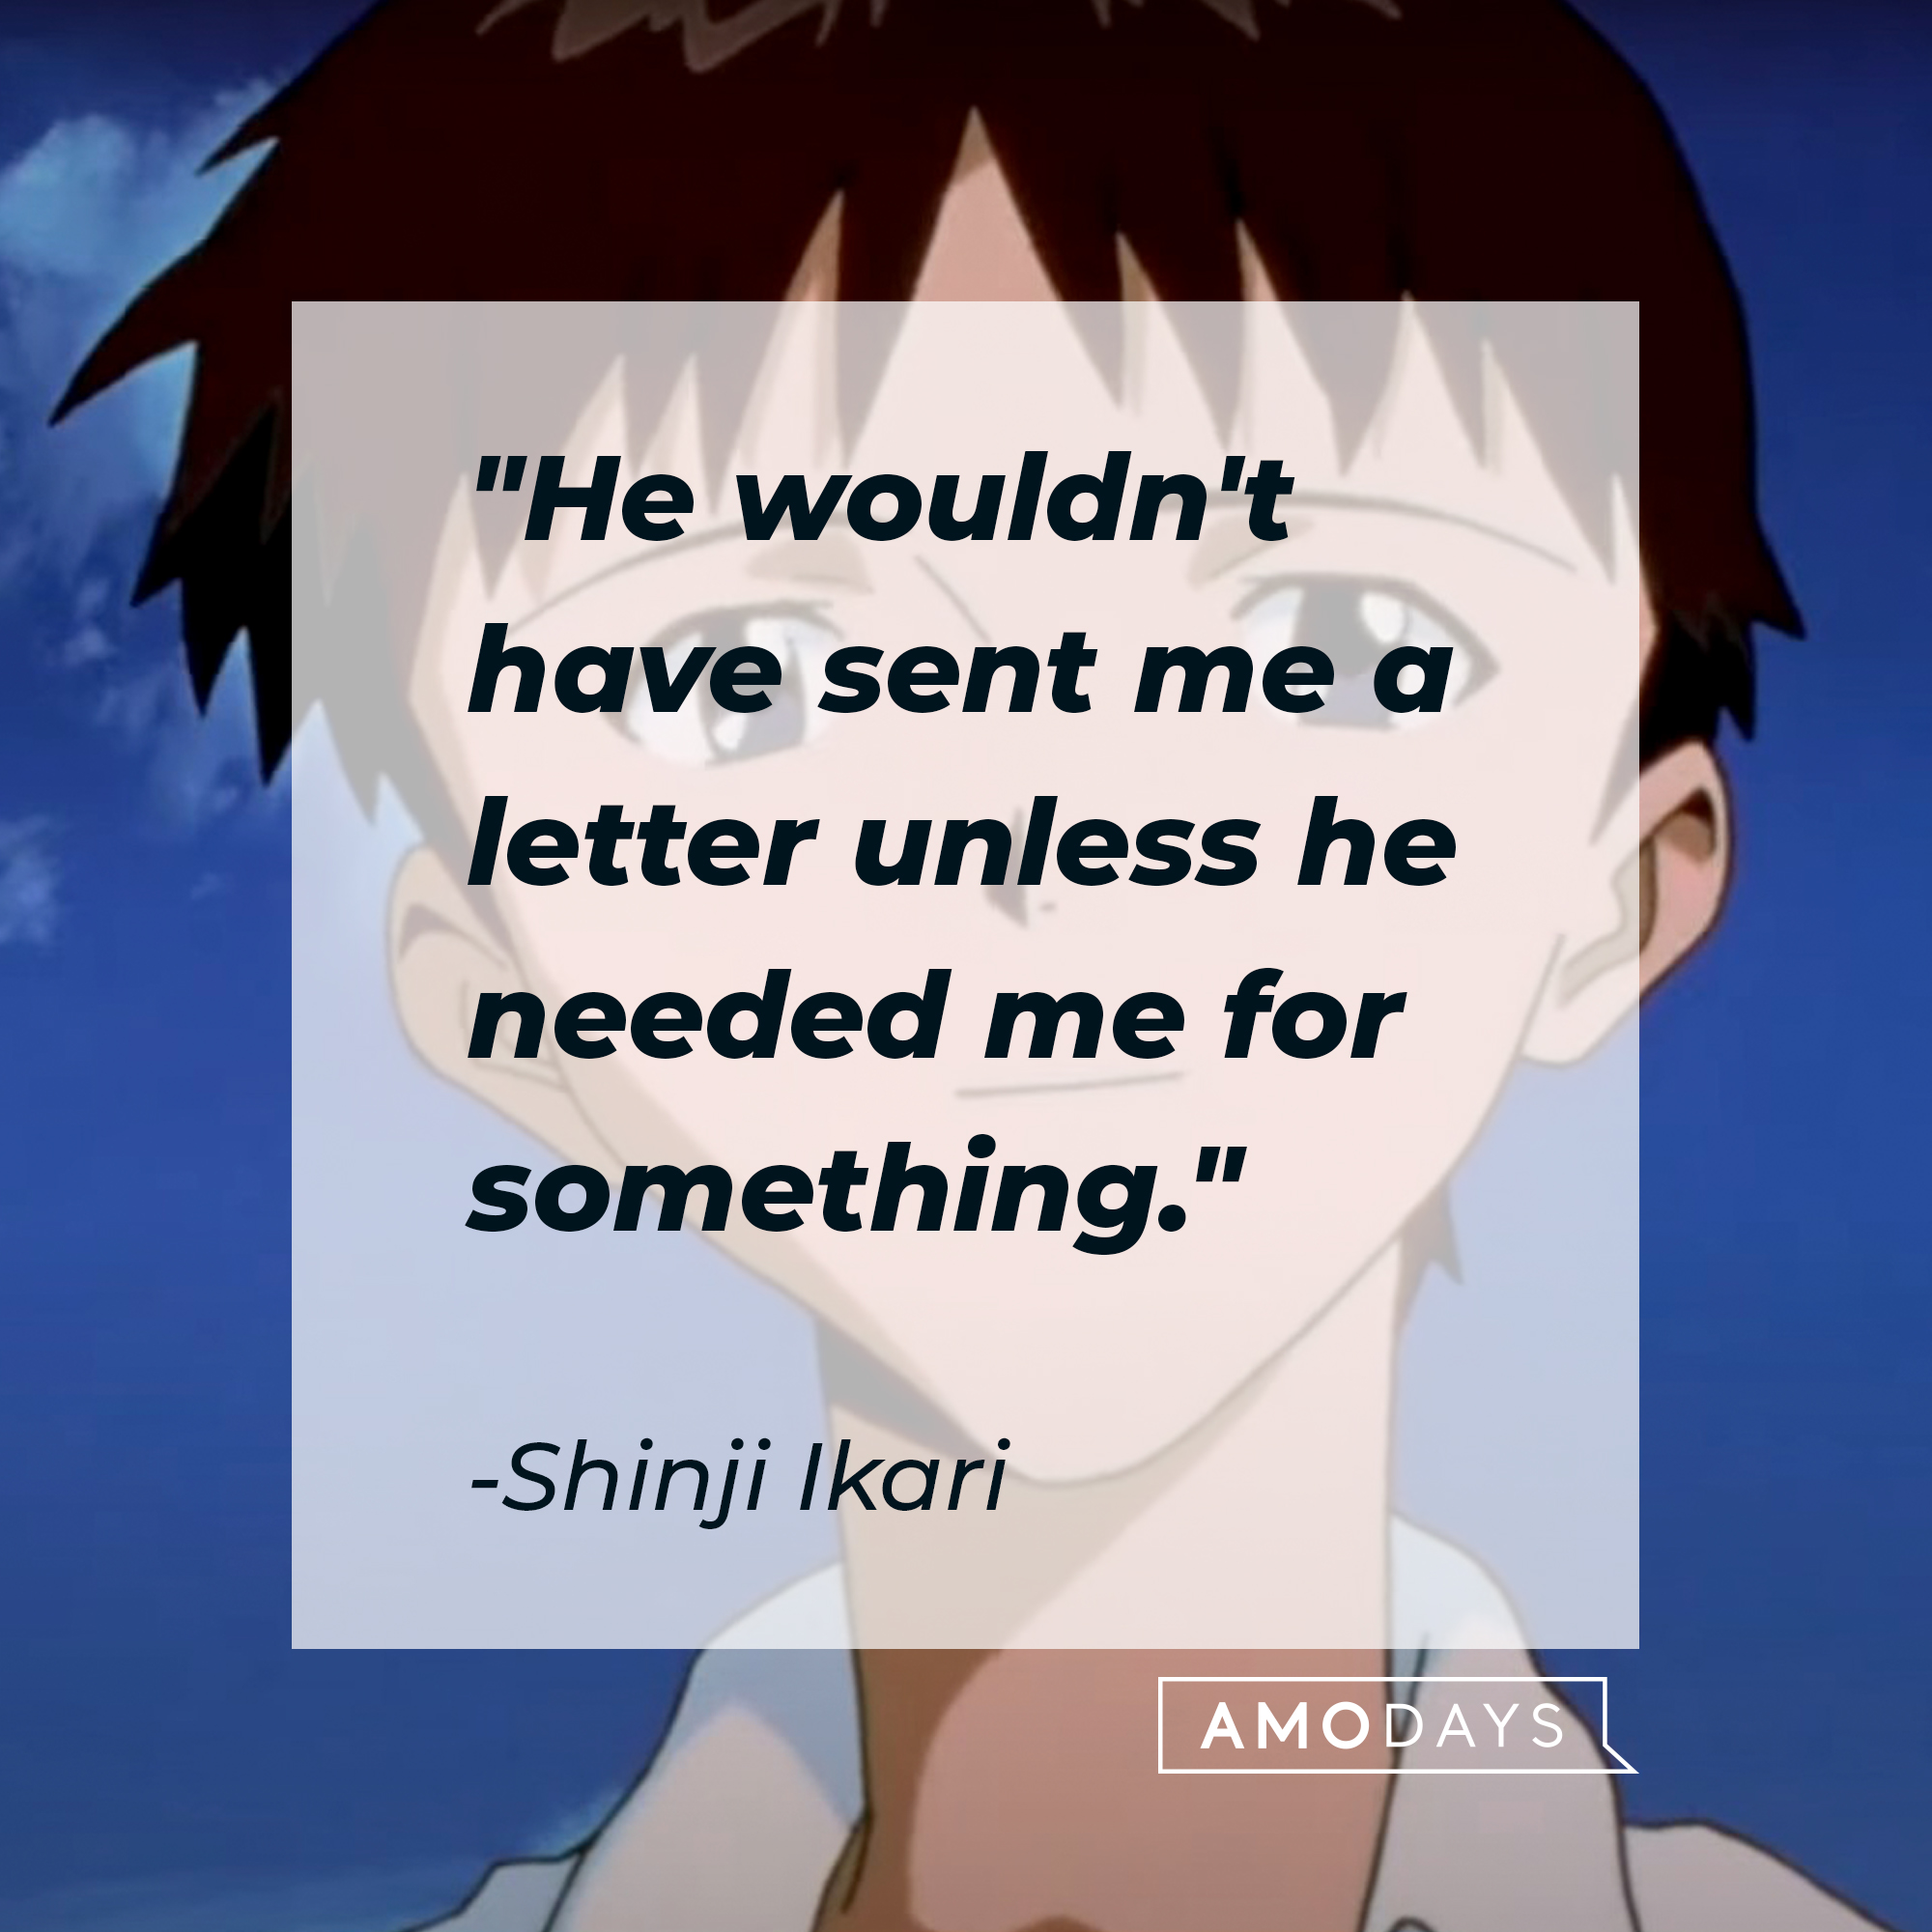 Shinji Ikari's quote: "He wouldn't have sent me a letter unless he needed me for something." | Source: Facebook.com/EvangelionMovie